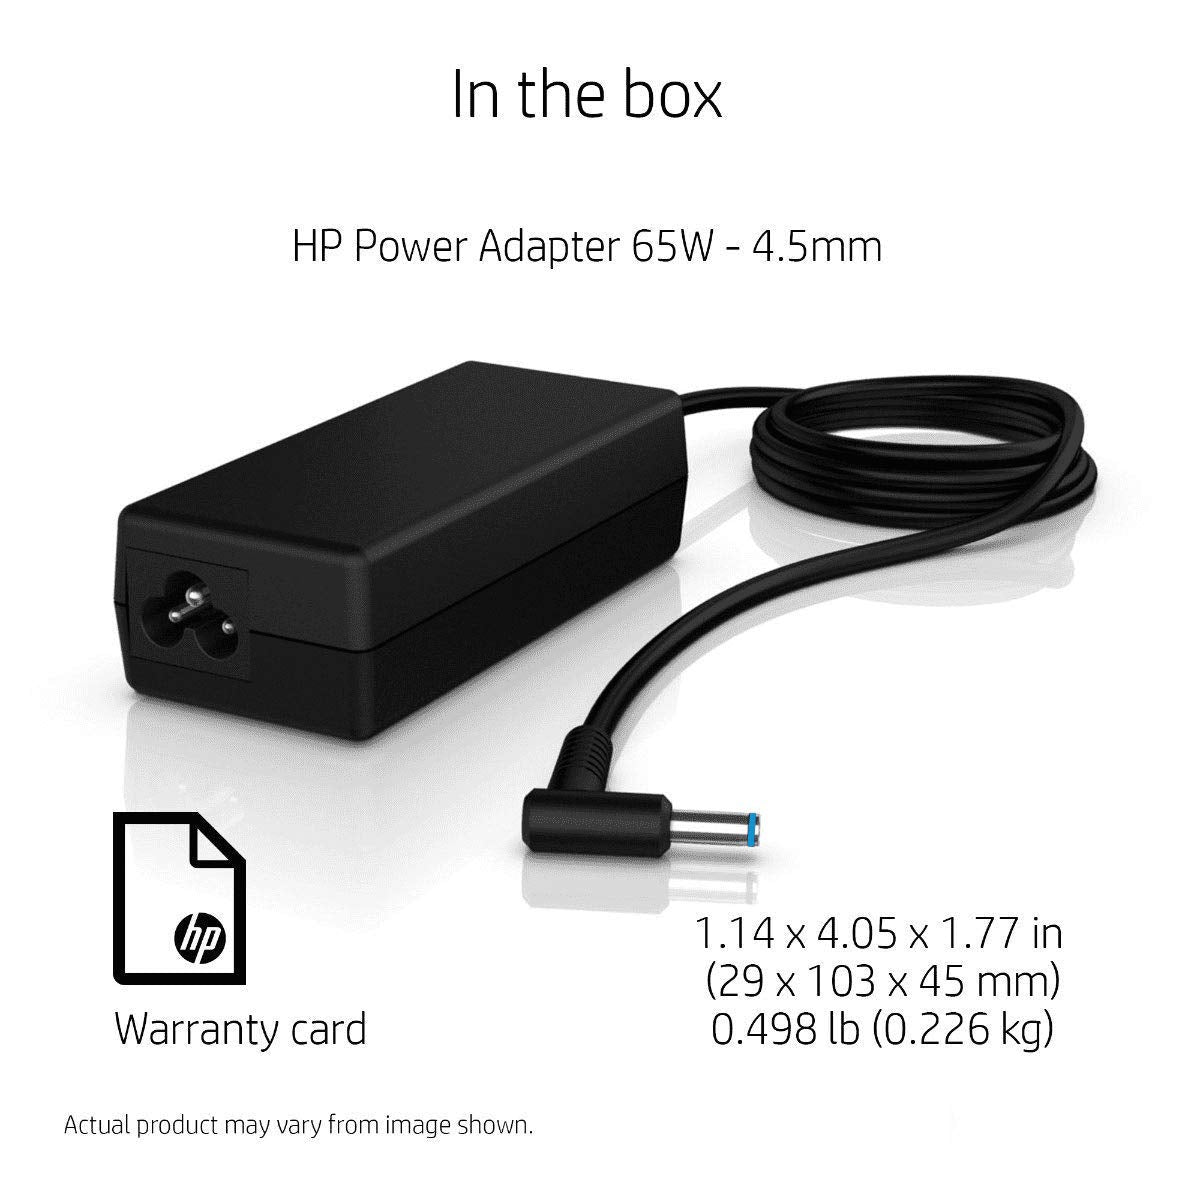 HP 65W Blue Pin 4.5mm, Adapter with 1 Year Brand Warranty